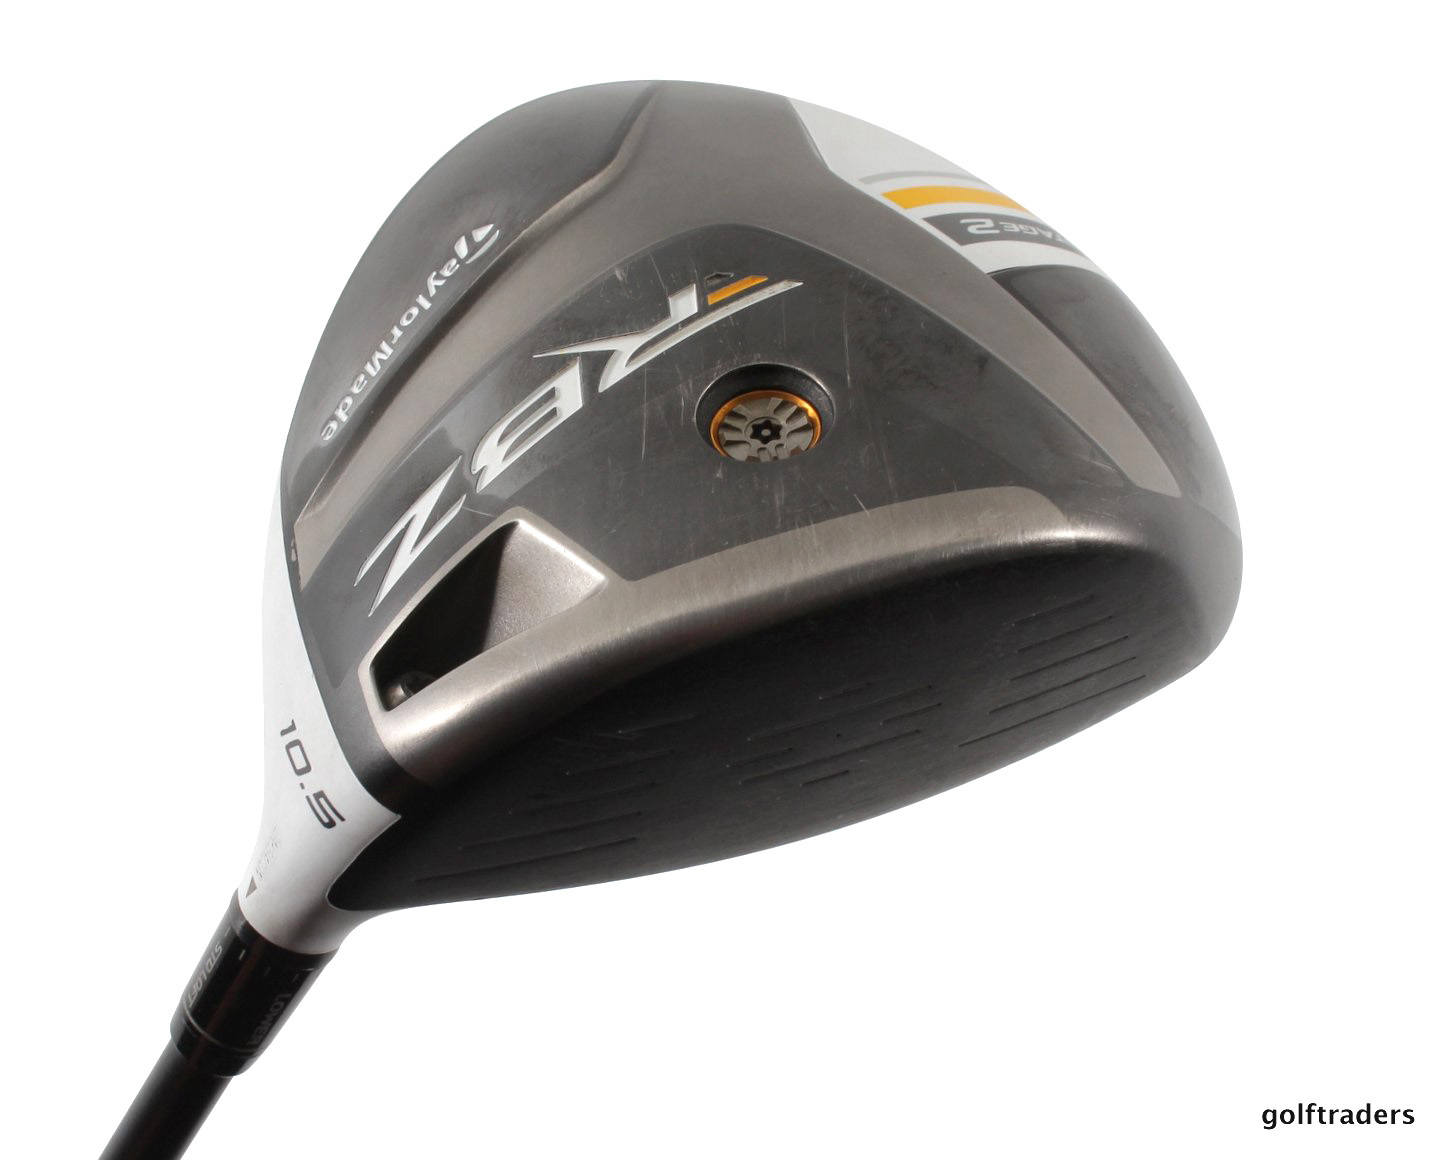 taylormade rocketballz driver for sale